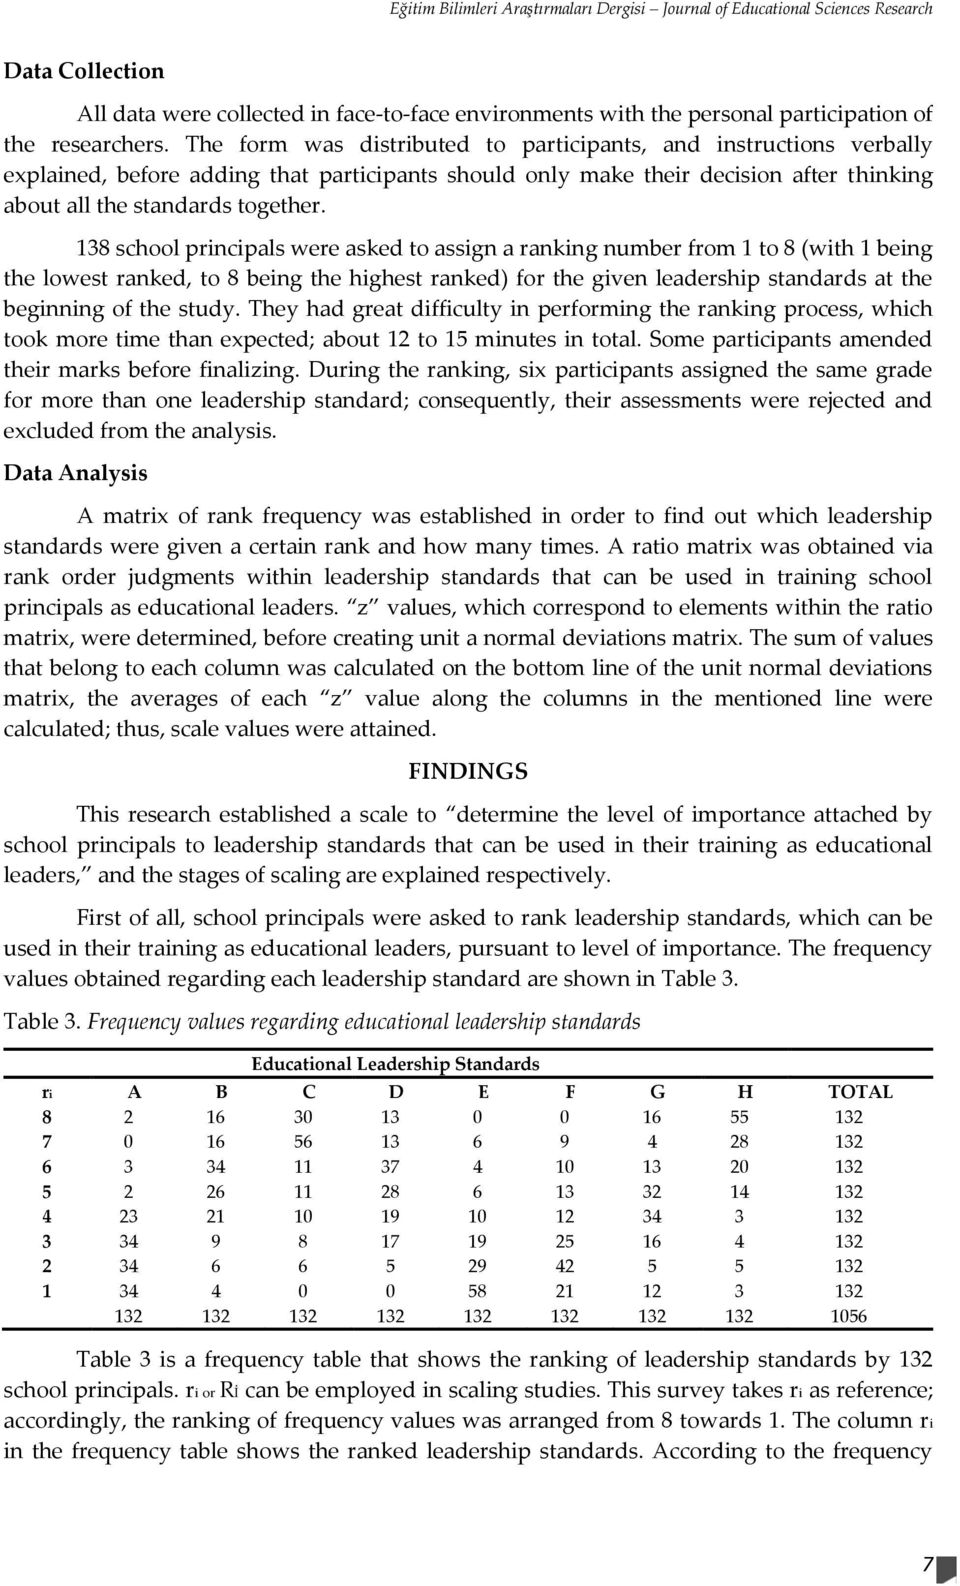 138 school principals were asked to assign a ranking number from 1 to 8 (with 1 being the lowest ranked, to 8 being the highest ranked) for the given leadership standards at the beginning of the